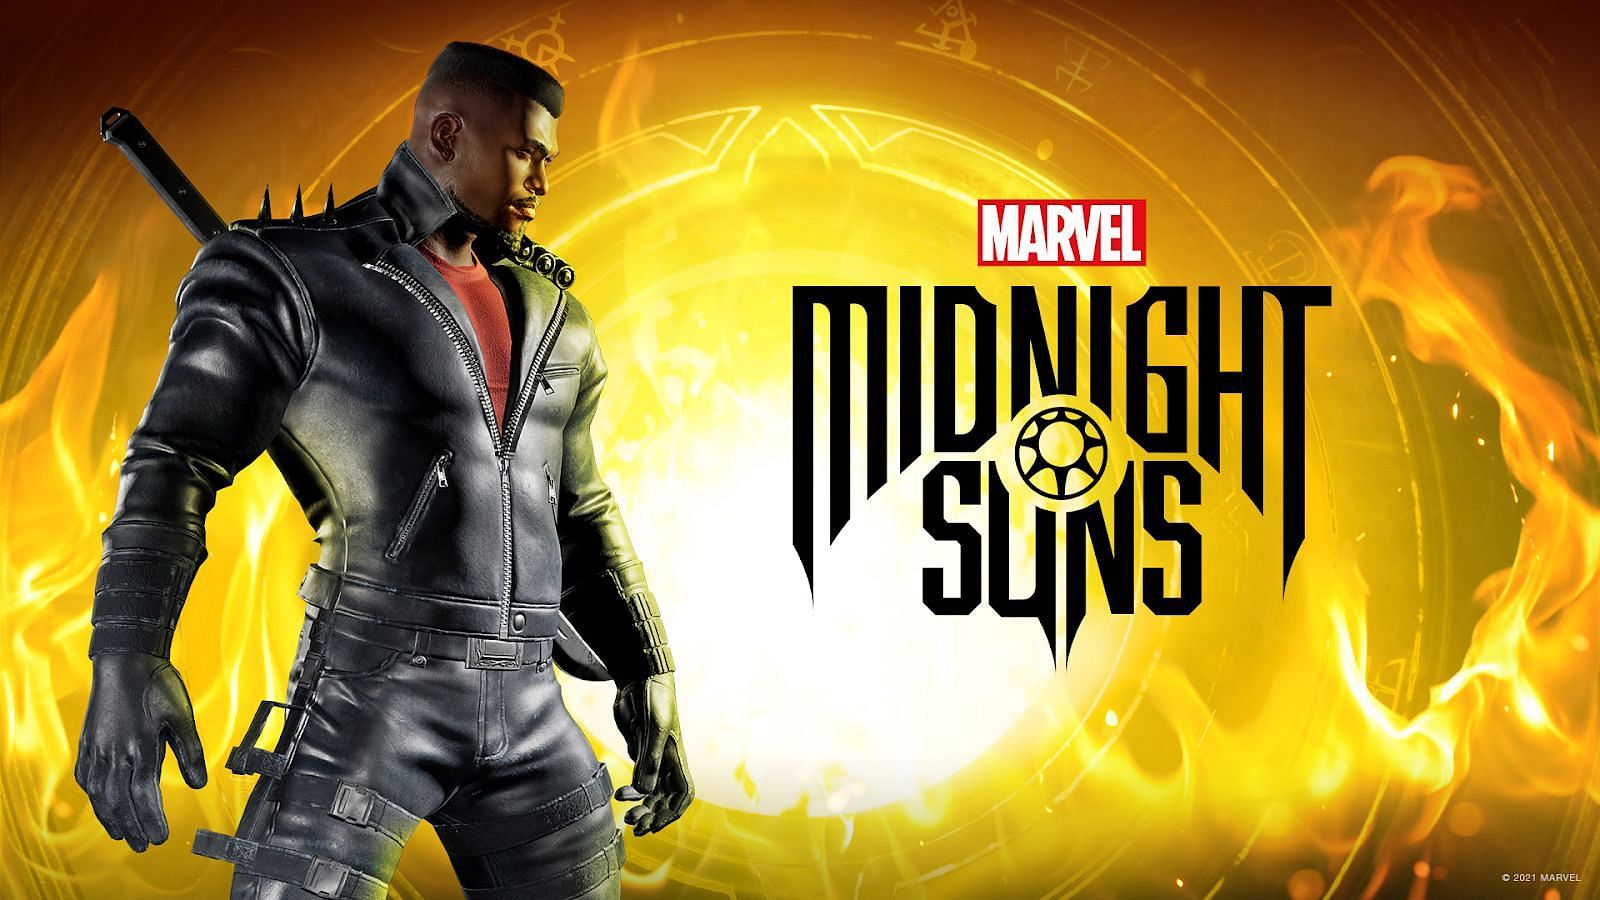 Character creation revealed 🔥 - Marvel's Midnight Suns 